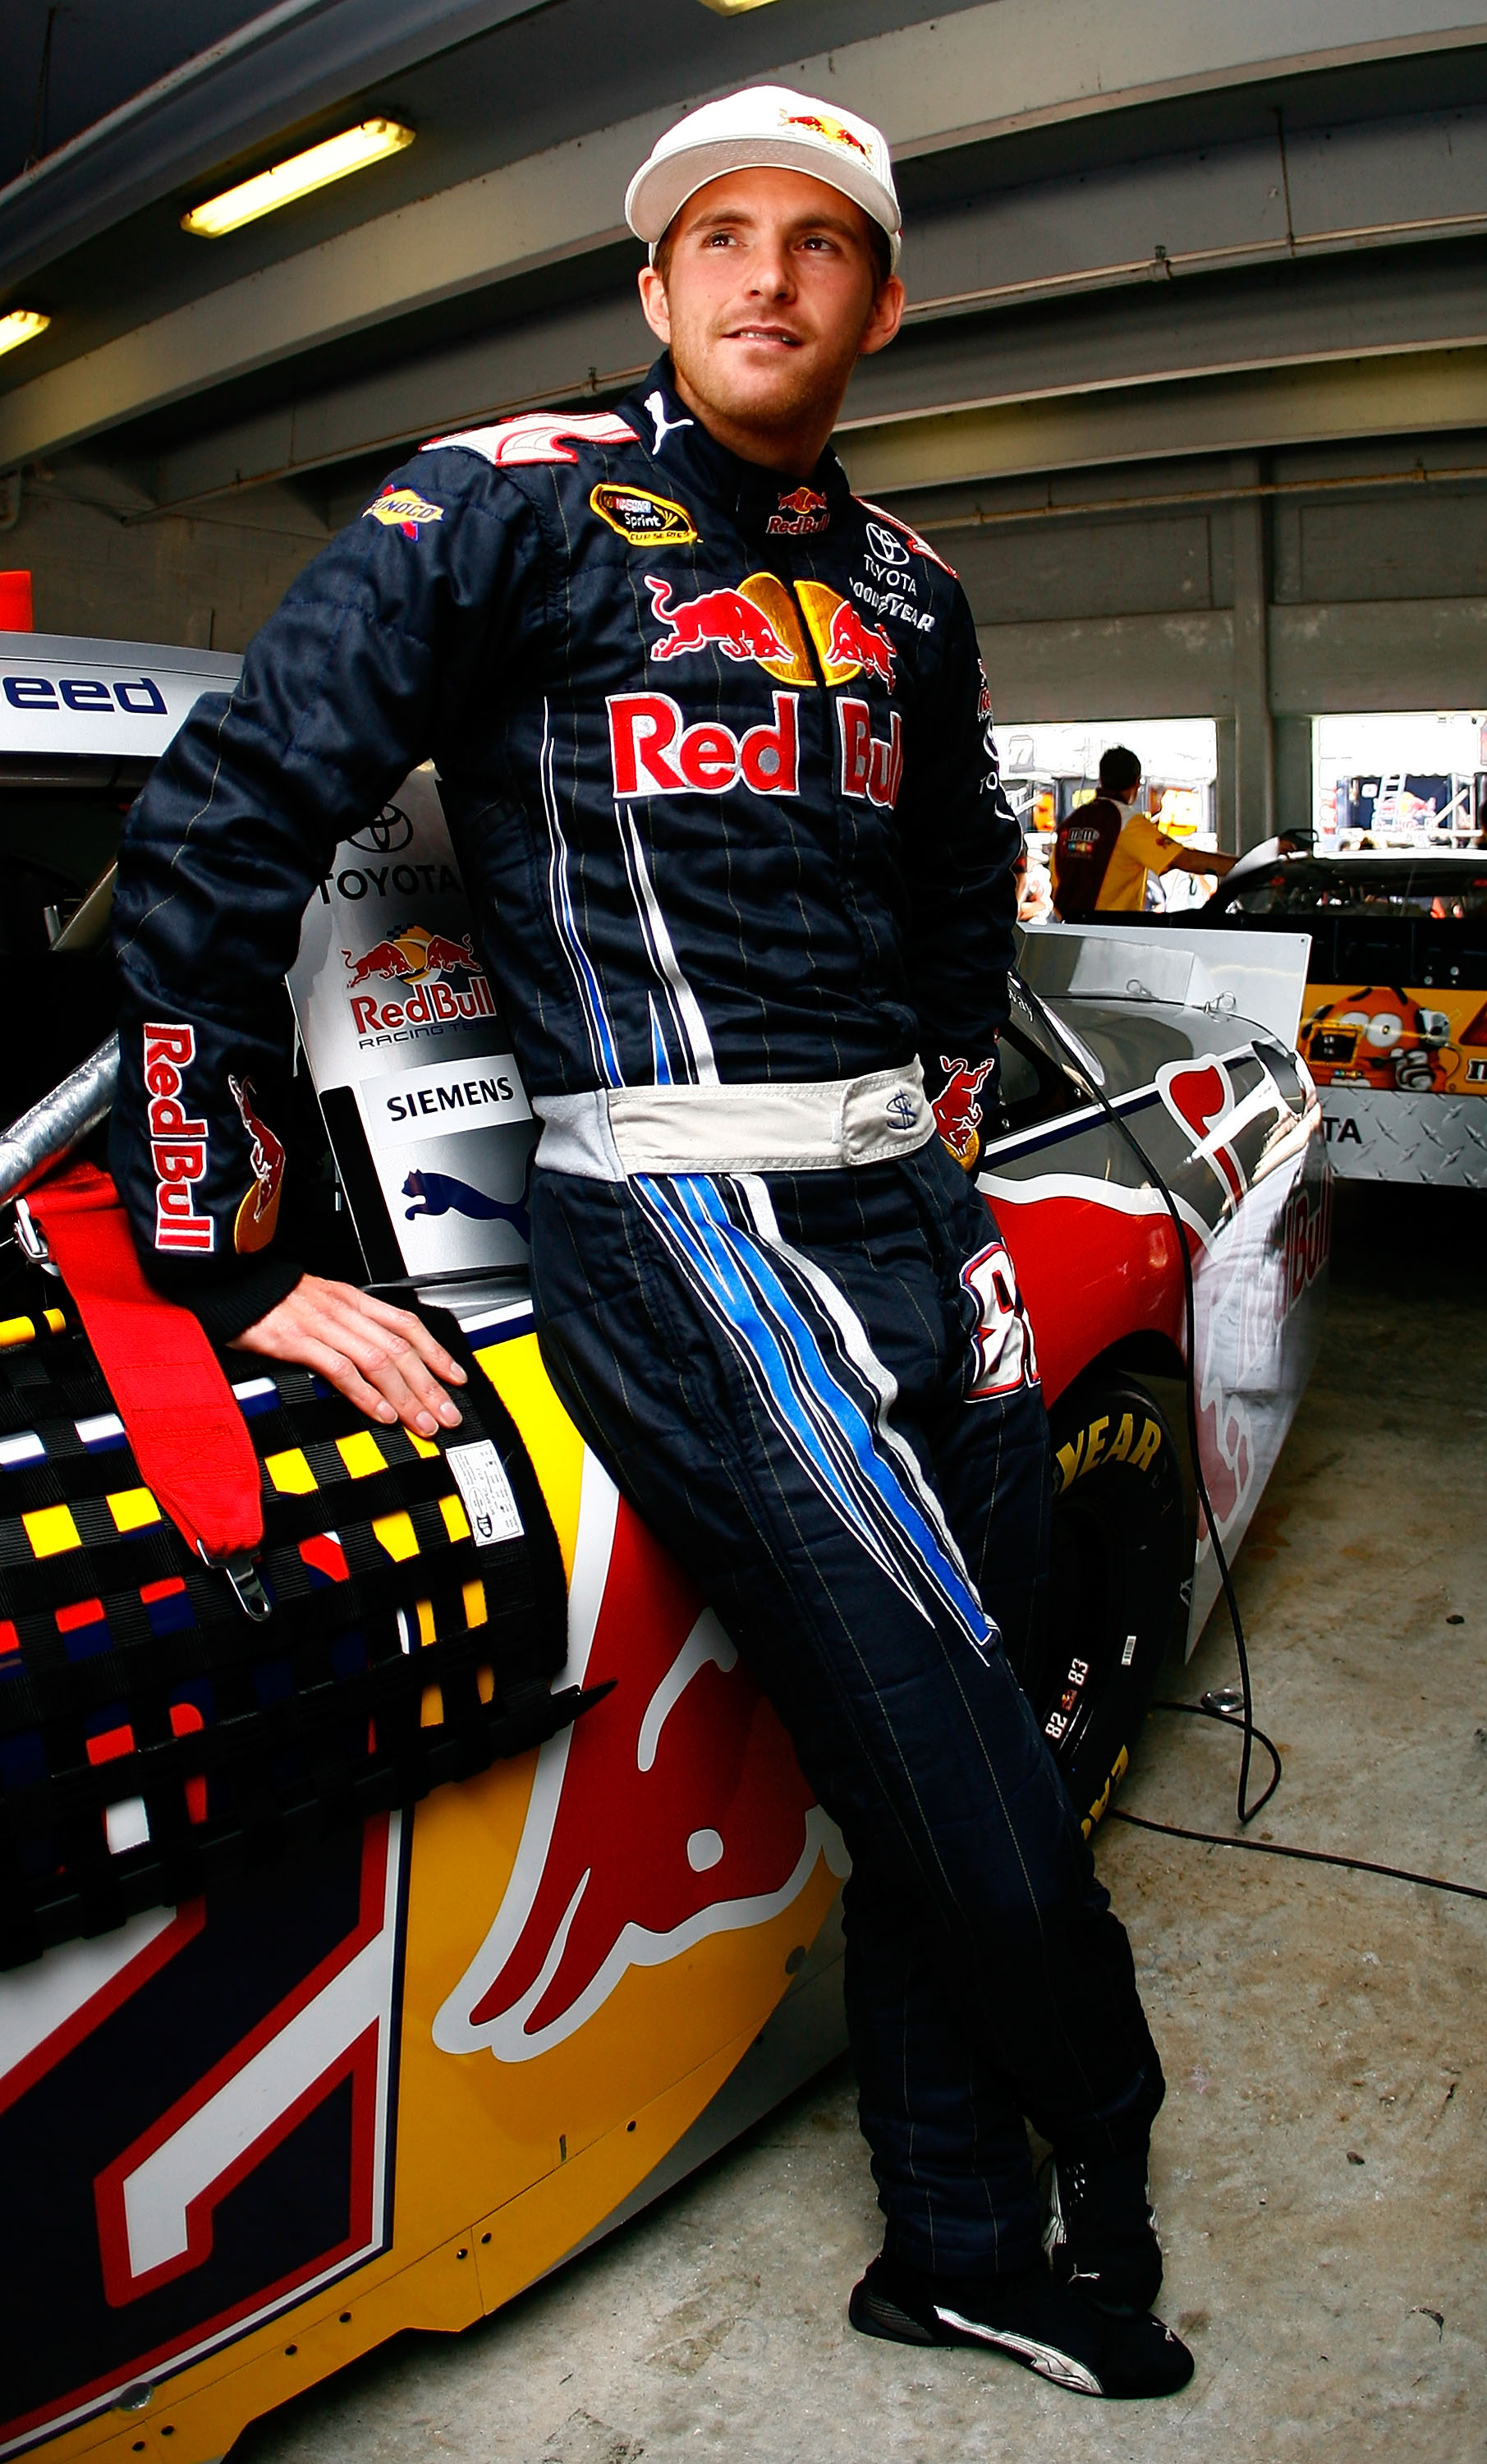 HOMESTEAD, FL - NOVEMBER 20:  Scott Speed, driver of the #82 Red Bull Toyota, stands in the garage during practice for the NASCAR Sprint Cup Series Ford 400 at Homestead-Miami Speedway on November 20, 2010 in Homestead, Florida.  (Photo by Jason Smith/Get